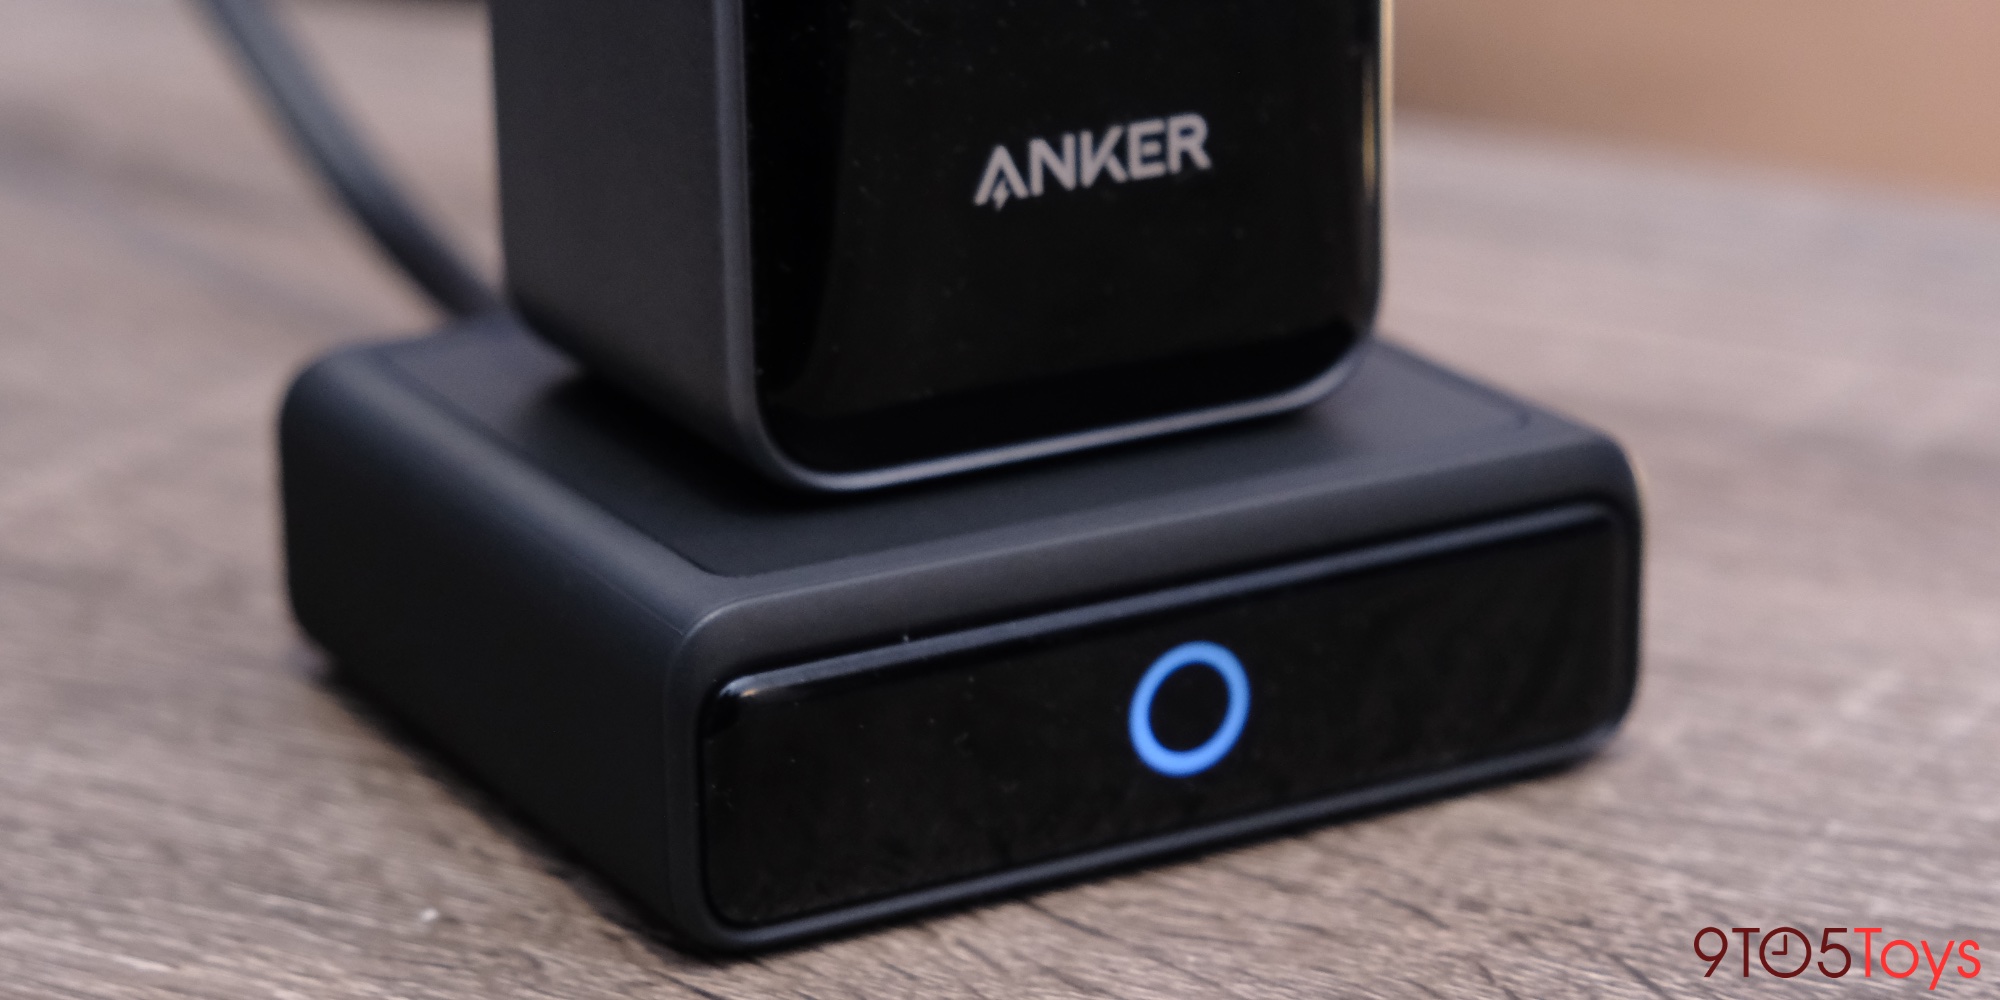 Anker Prime Power Bank review: My new favorite battery